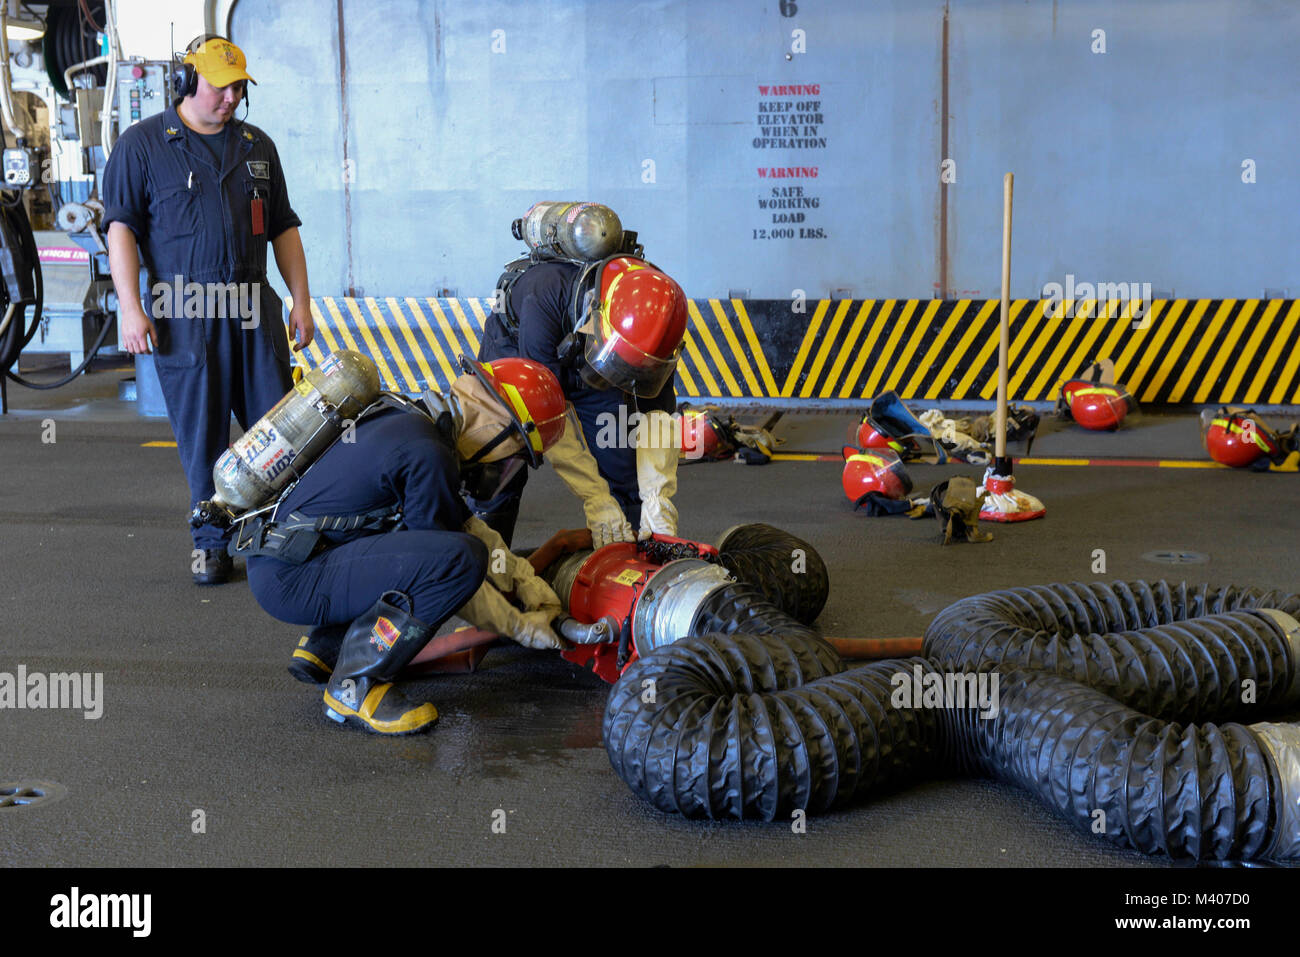 180207-N-NI298-046  SAN DIEGO (Feb. 7, 2018) Sailors assigned to amphibious assault ship USS Boxer (LHD 4) assemble a water-powered high-velocity de-smoking fan during an in-port emergency team drill. Boxer is currently in its homeport preparing for contractor sea trials. (U.S. Navy photo by Mass Communication Specialist 3rd Class Tristin Barth/Released) Stock Photo